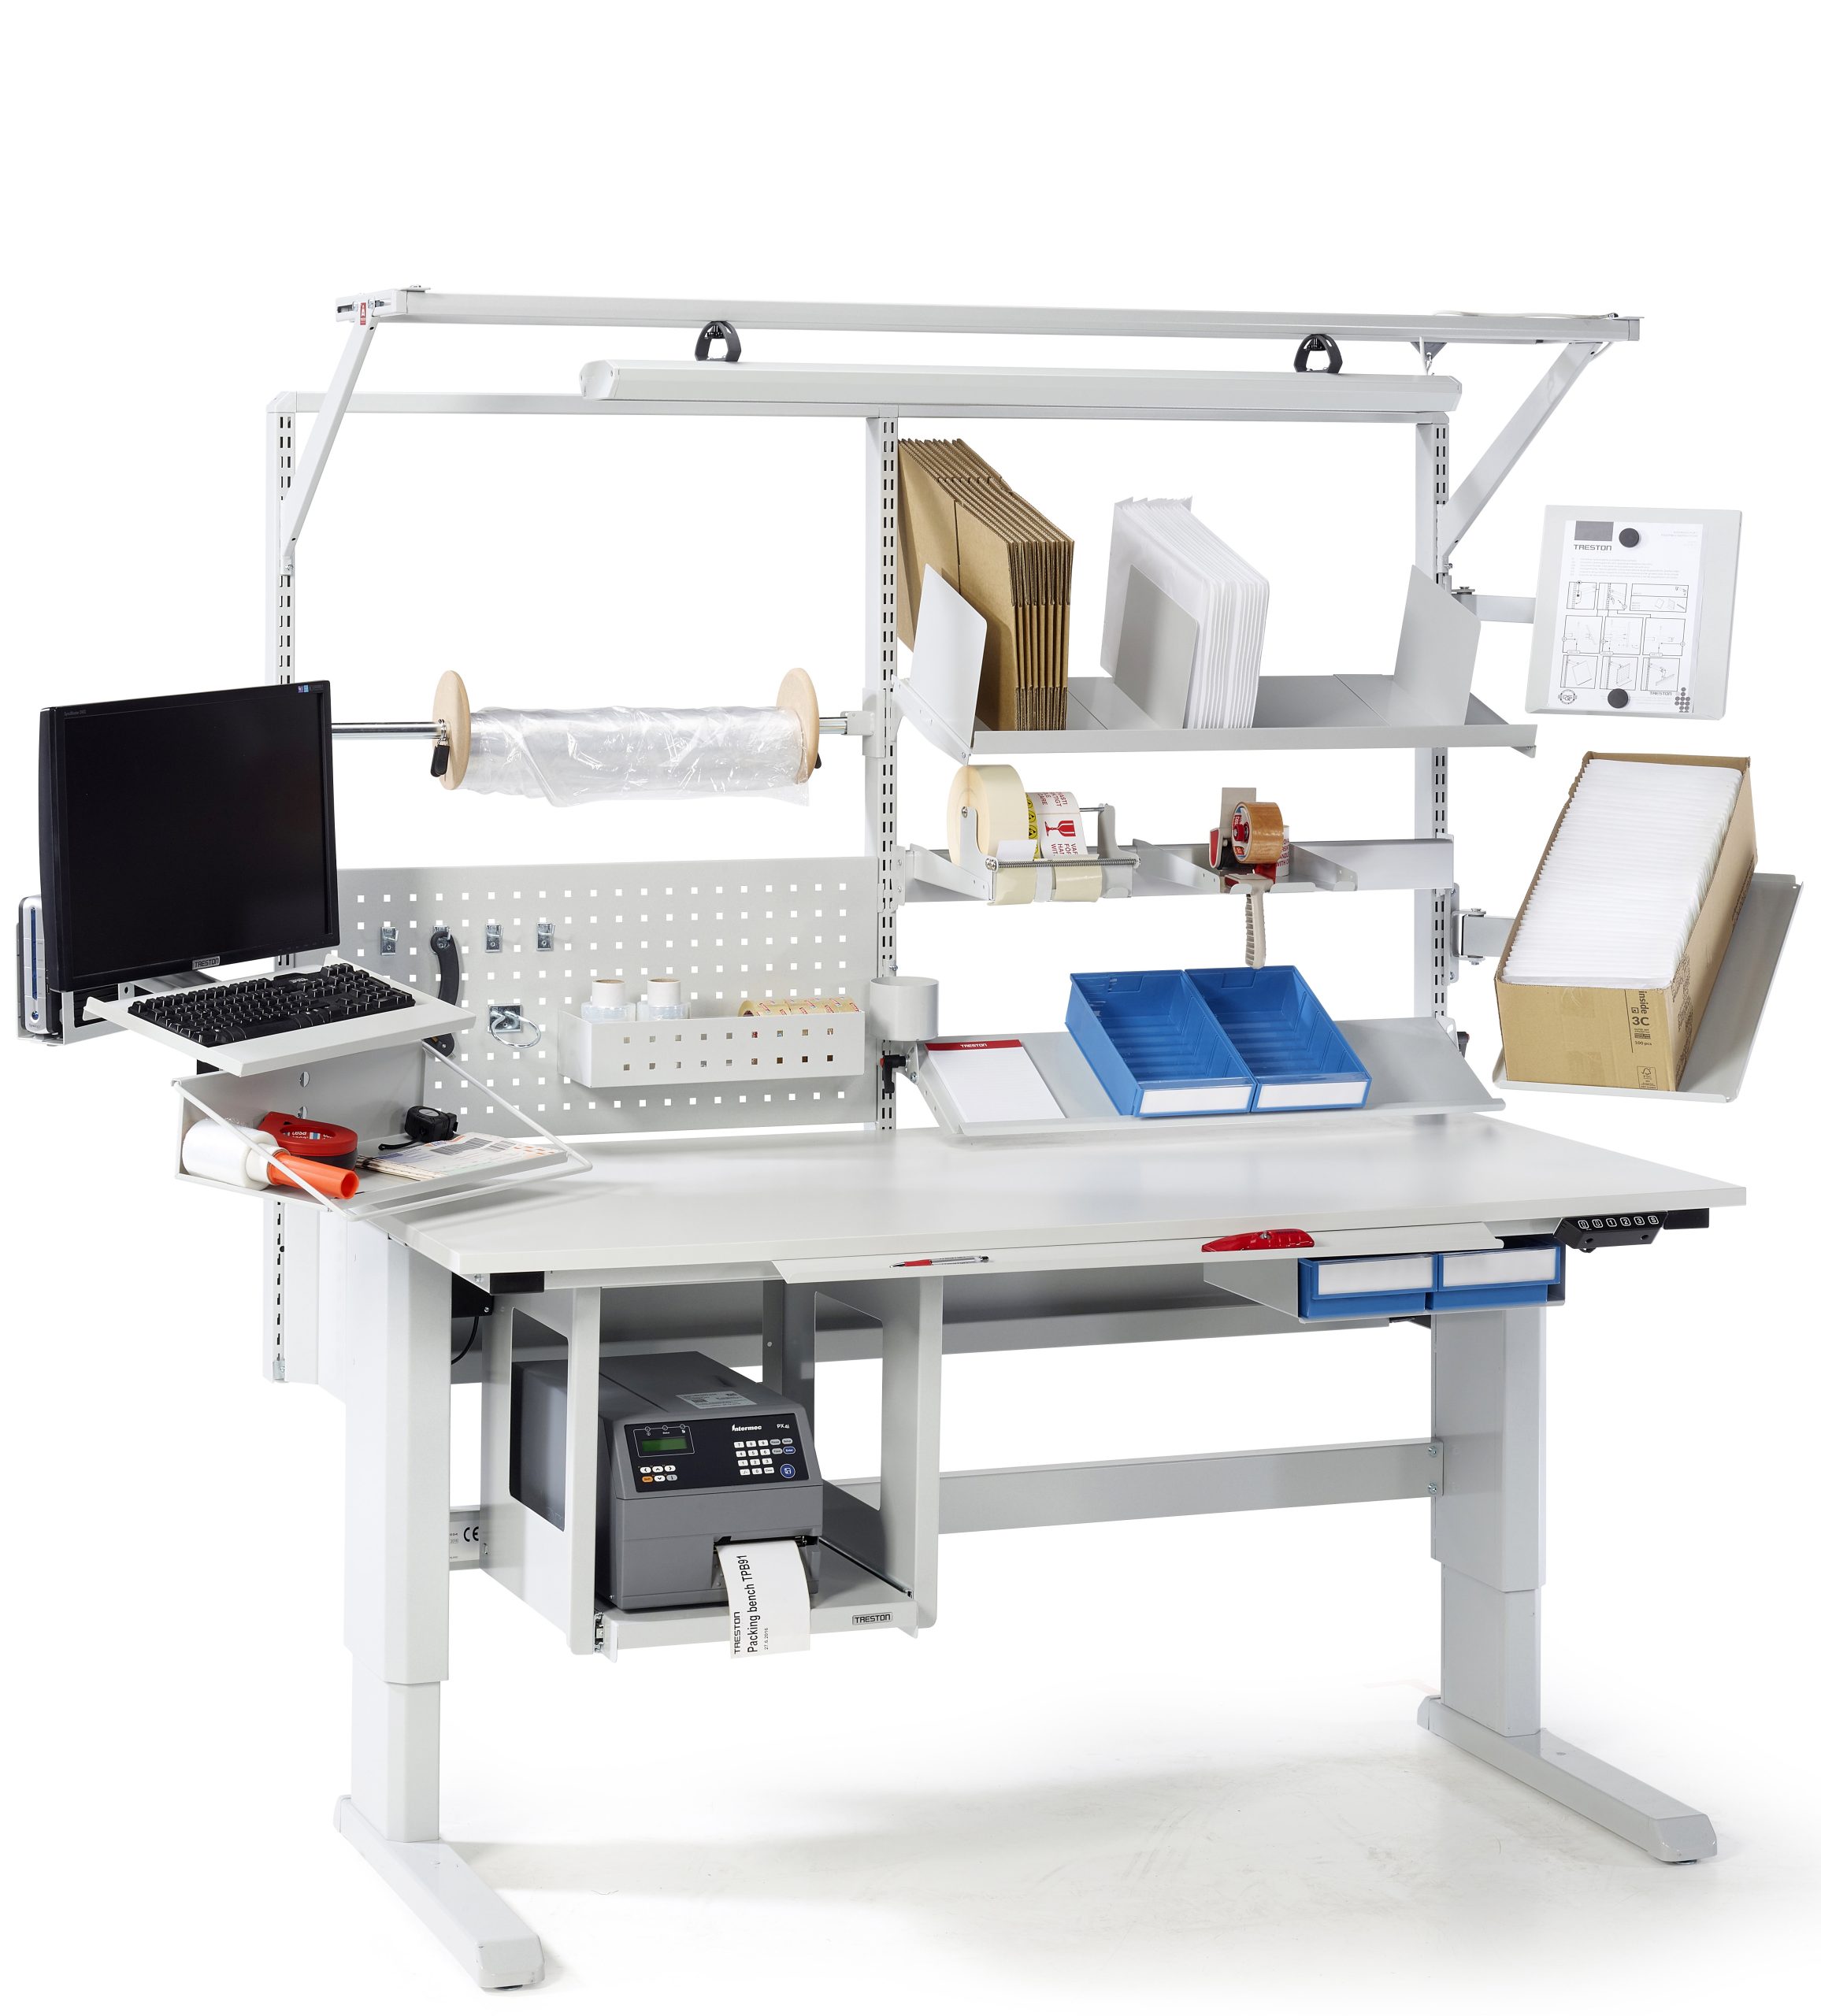 MaRC Technologies Grows ESD Workstation Offering with New Partner Treston Inc.